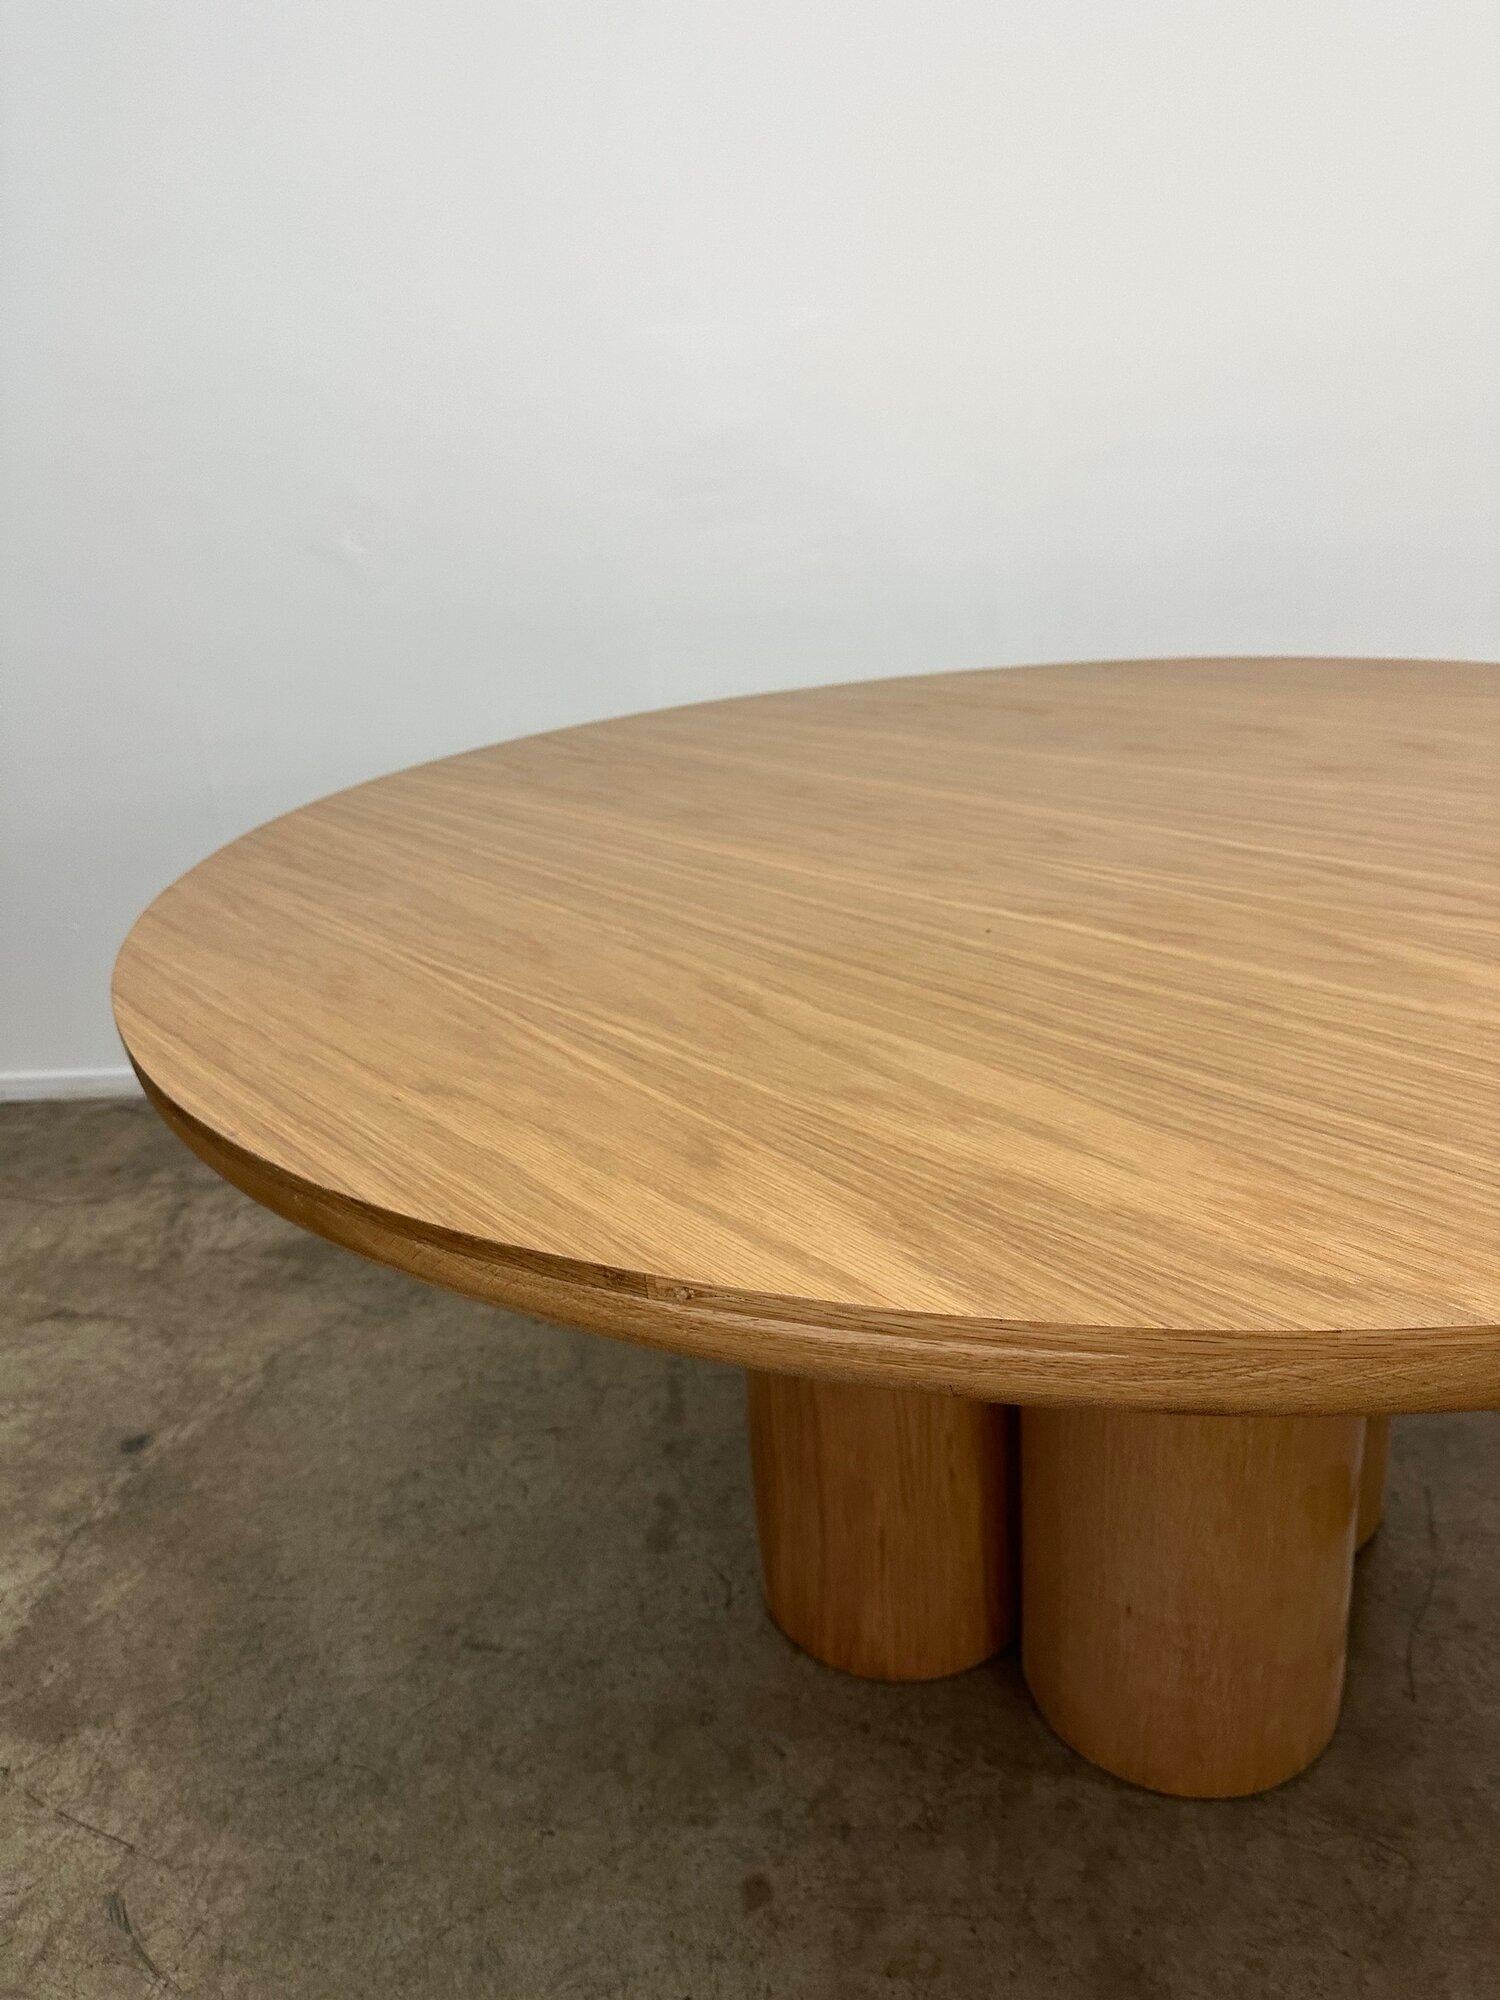 Curvitas Dining Table, White Oak In Excellent Condition For Sale In Los Angeles, CA